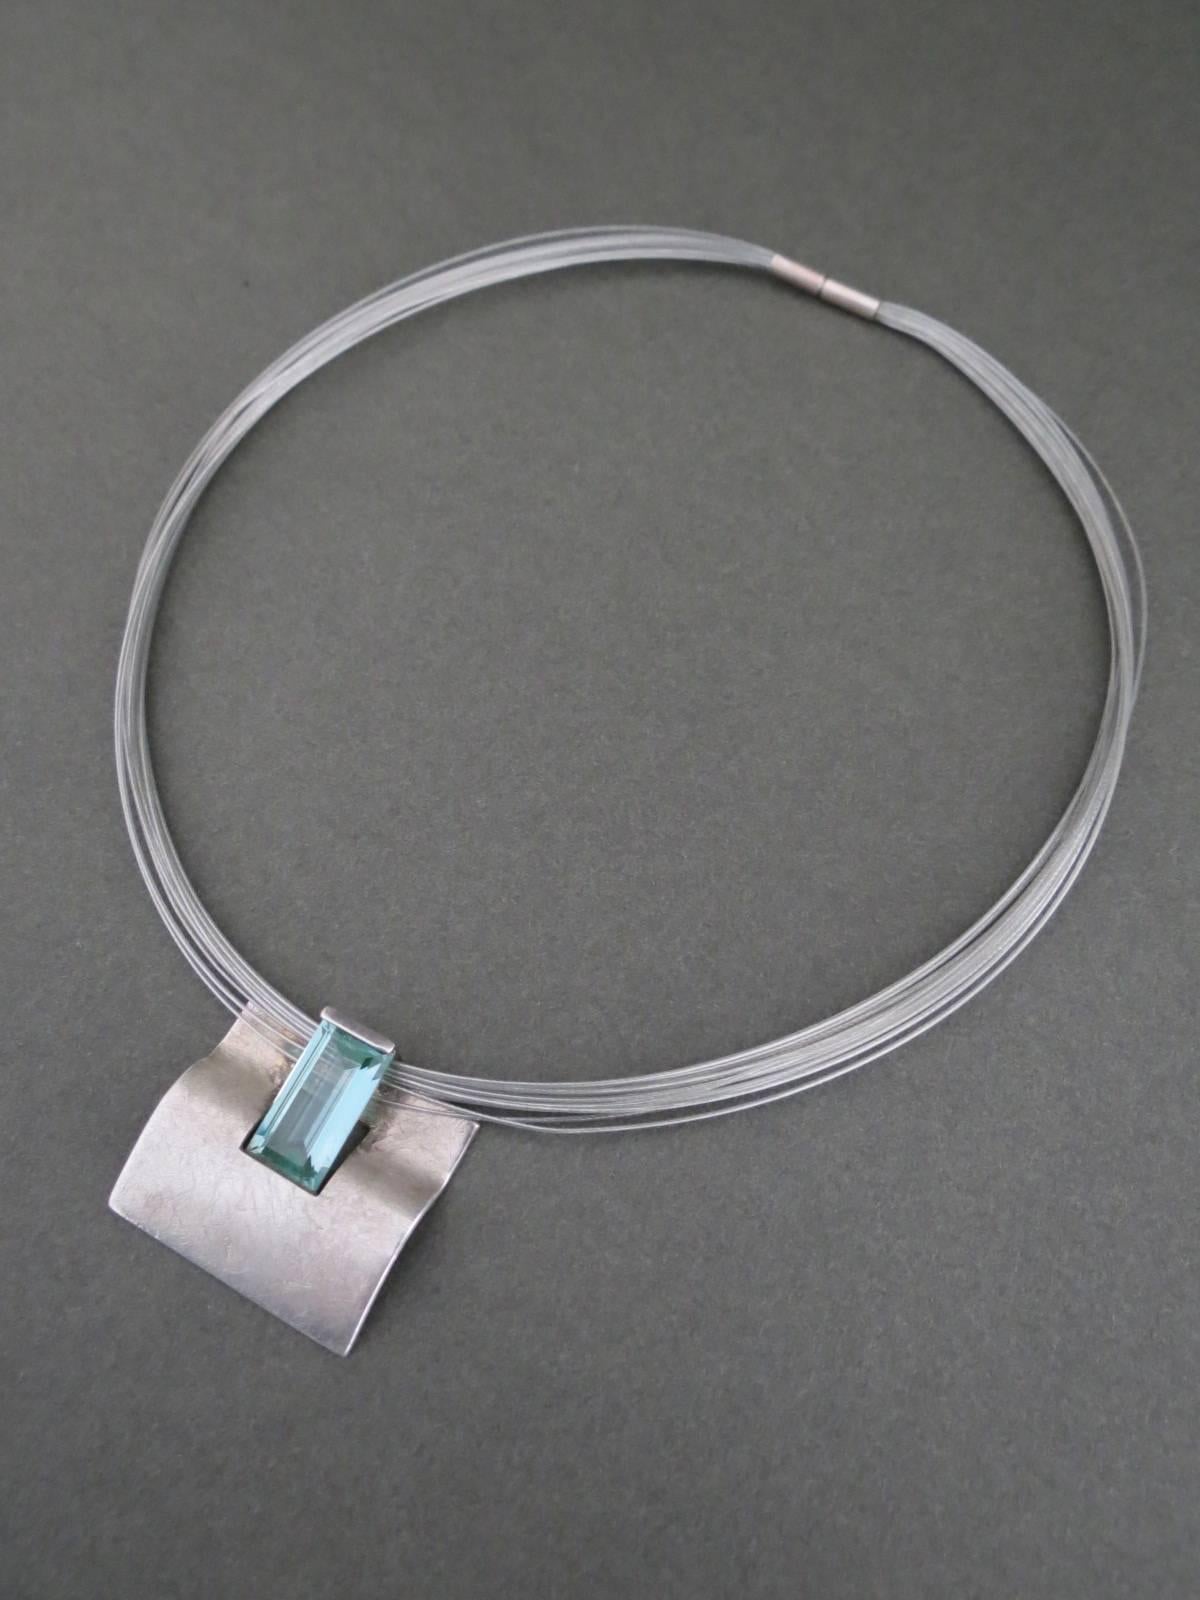 Vintage Danish Mid Century Silver Topaz Modernist Pendant Necklace Choker. The necklace is hallmarked.
Item Specifics
Lenght: 43cm (approx 17.00